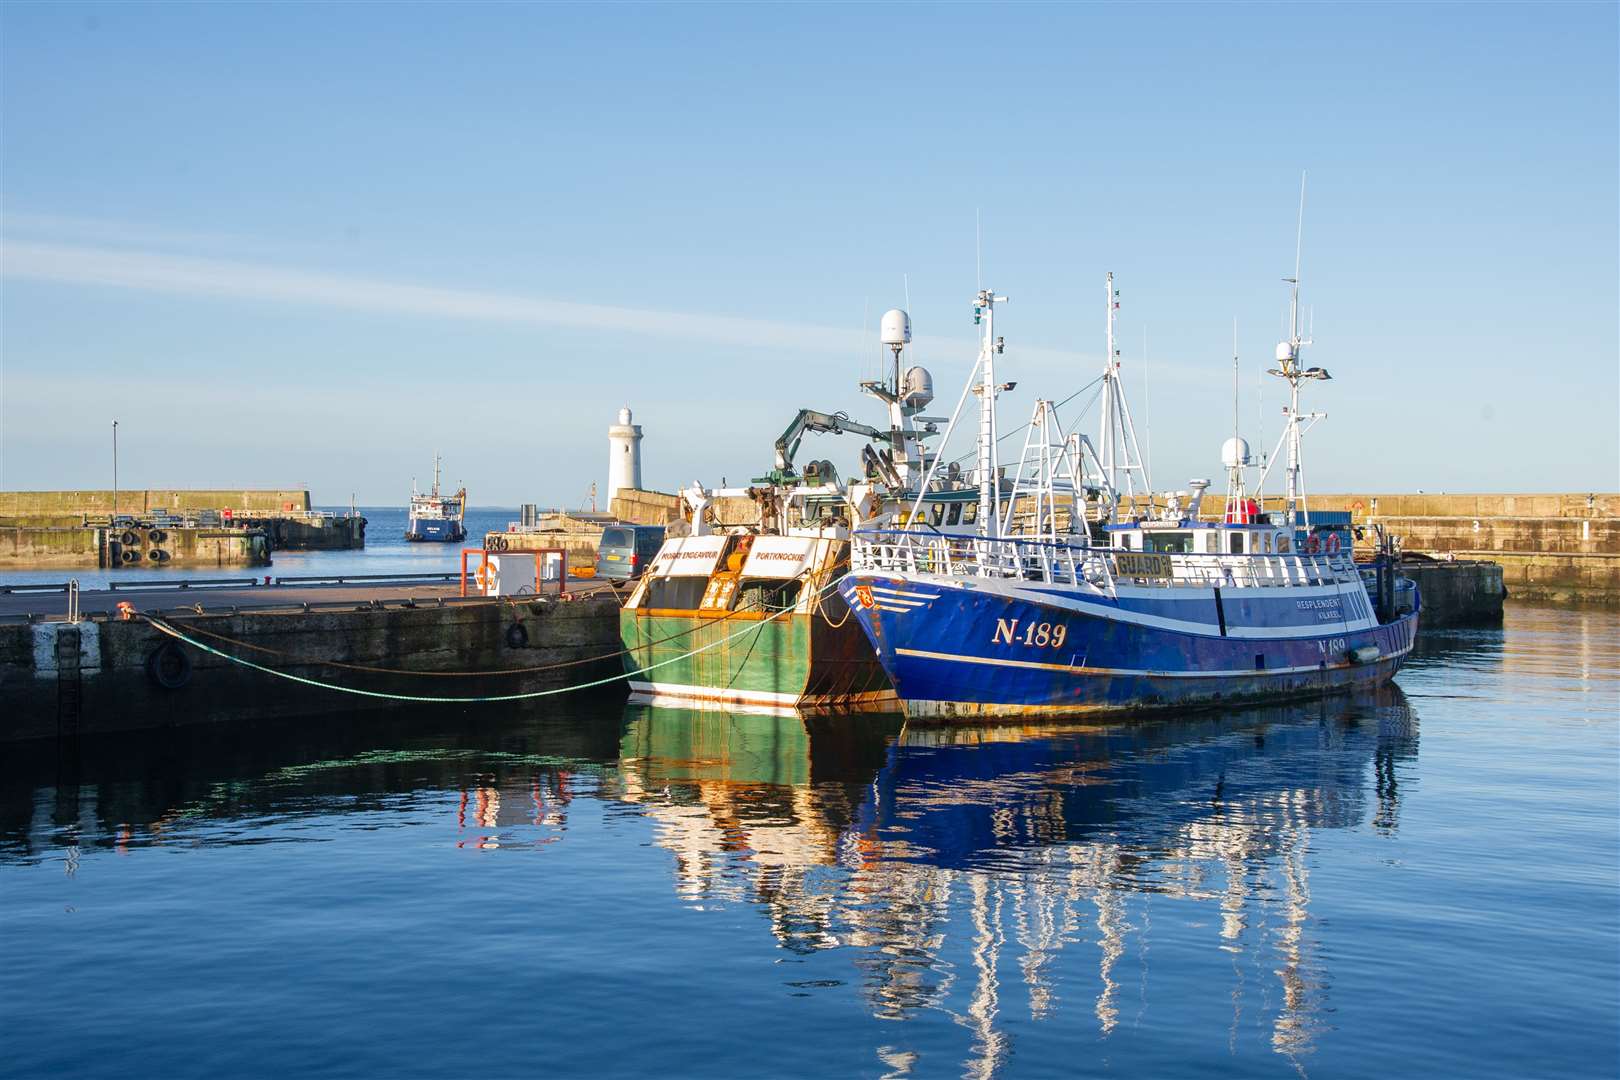 Four vessels landed their catches at Buckie Harbour last week.